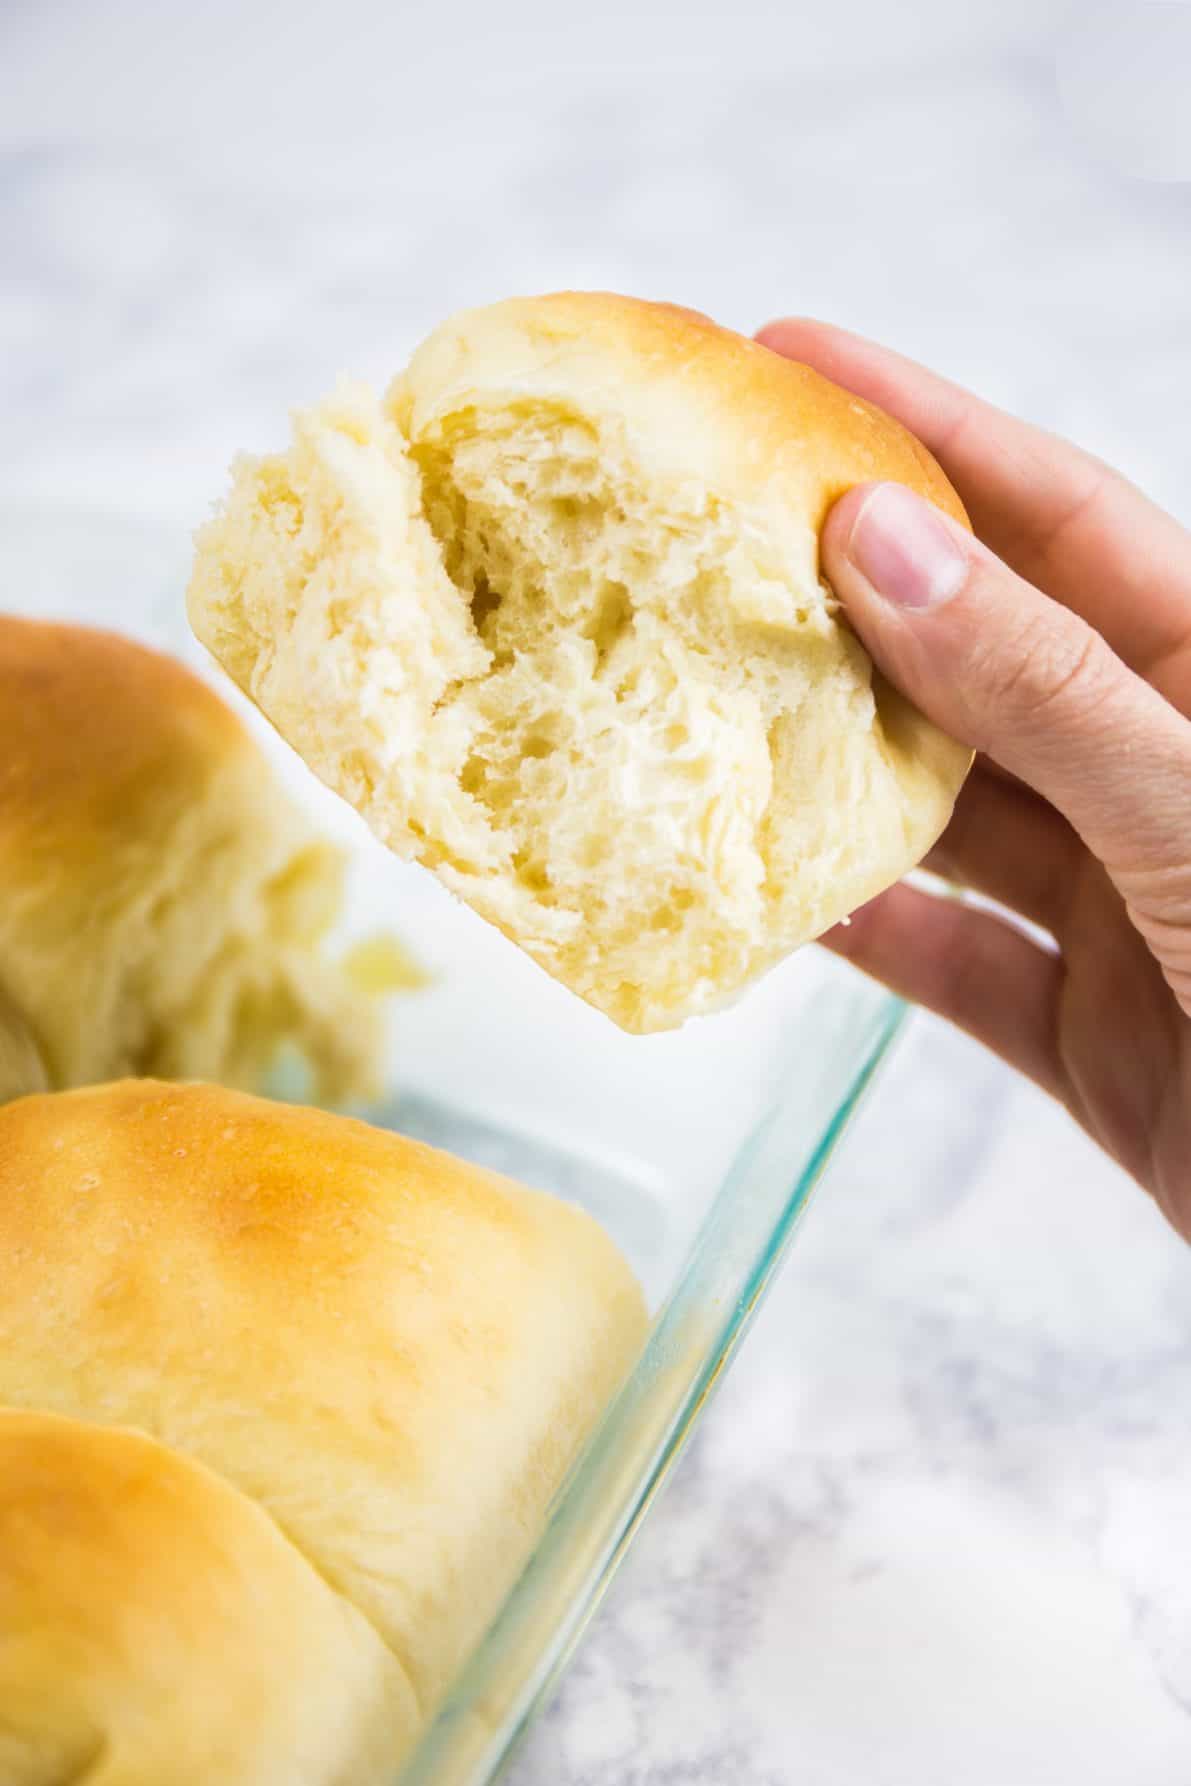 Someone's hand grabbing a milk bread roll out of the pan.